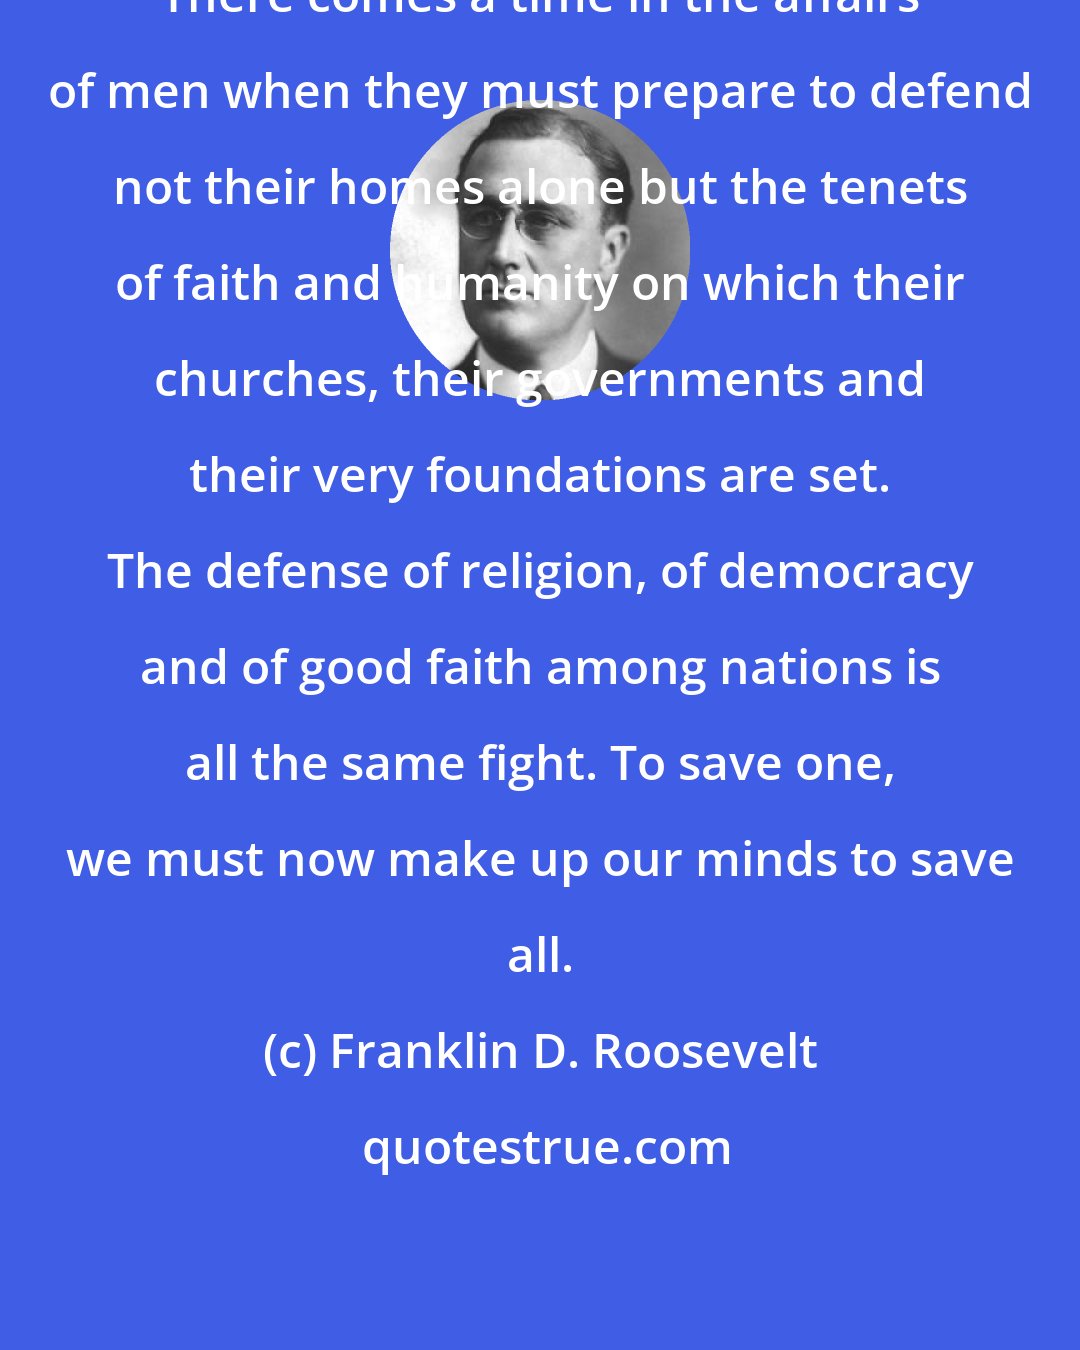 Franklin D. Roosevelt: There comes a time in the affairs of men when they must prepare to defend not their homes alone but the tenets of faith and humanity on which their churches, their governments and their very foundations are set. The defense of religion, of democracy and of good faith among nations is all the same fight. To save one, we must now make up our minds to save all.